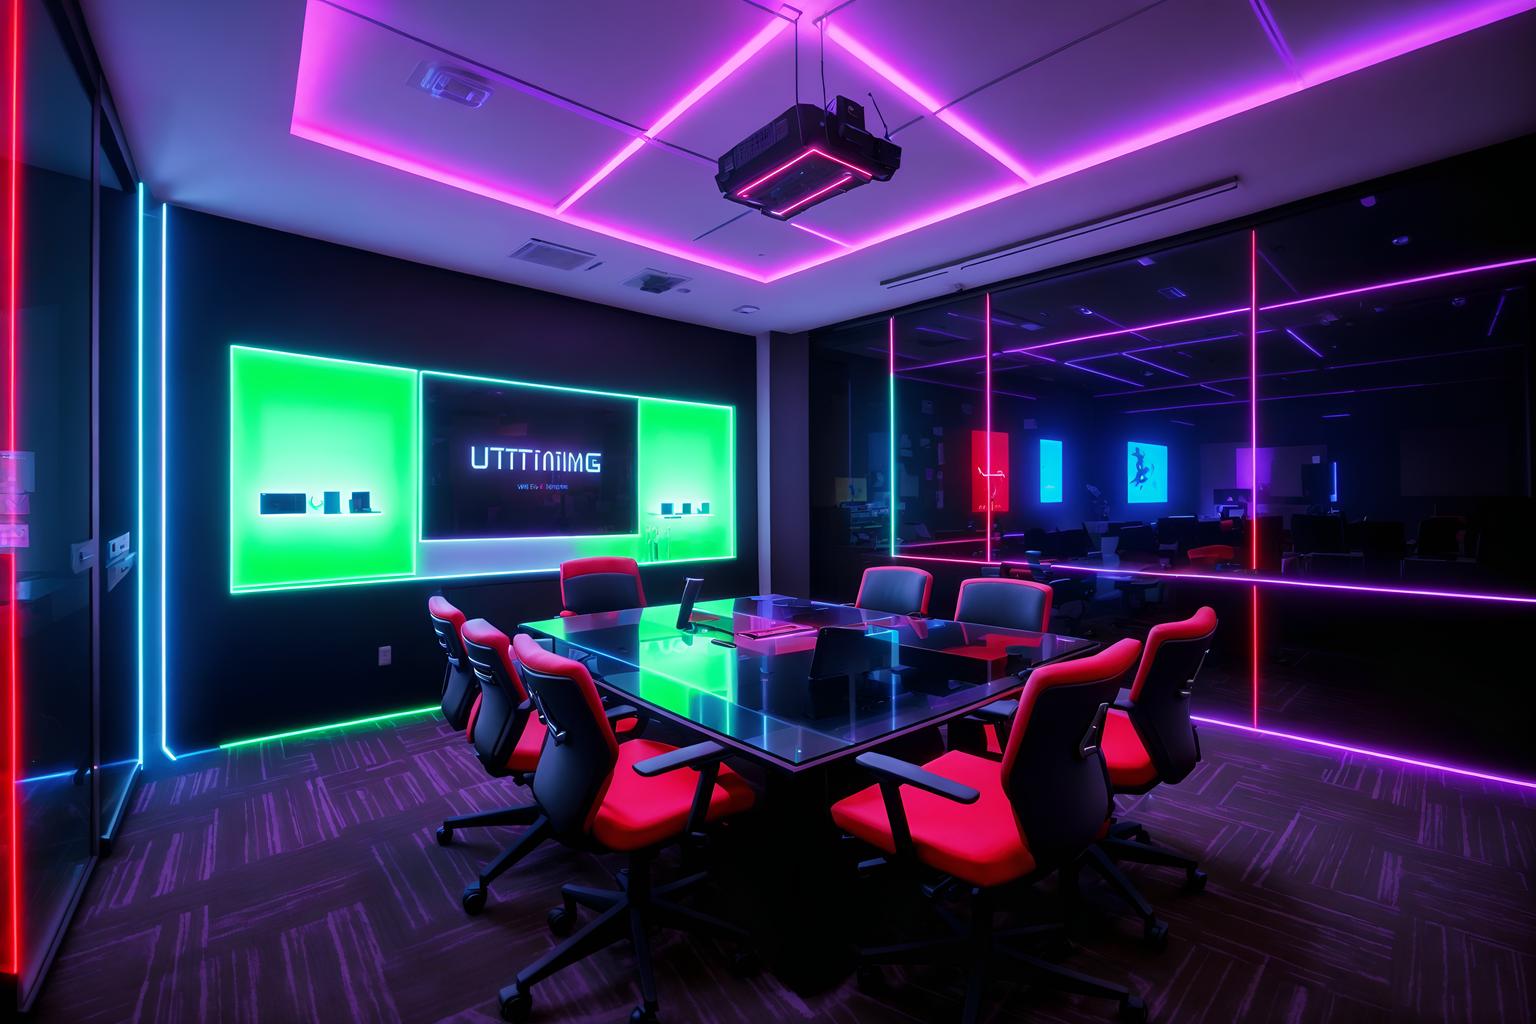 gaming room-style (meeting room interior) with painting or photo on wall and glass walls and glass doors and cabinets and plant and boardroom table and office chairs and vase. . with at night and dark room and multiple displays and neon lights and speakers and purple and red lights and neon letters on wall and computer desk with computer displays and keyboard. . cinematic photo, highly detailed, cinematic lighting, ultra-detailed, ultrarealistic, photorealism, 8k. gaming room interior design style. masterpiece, cinematic light, ultrarealistic+, photorealistic+, 8k, raw photo, realistic, sharp focus on eyes, (symmetrical eyes), (intact eyes), hyperrealistic, highest quality, best quality, , highly detailed, masterpiece, best quality, extremely detailed 8k wallpaper, masterpiece, best quality, ultra-detailed, best shadow, detailed background, detailed face, detailed eyes, high contrast, best illumination, detailed face, dulux, caustic, dynamic angle, detailed glow. dramatic lighting. highly detailed, insanely detailed hair, symmetrical, intricate details, professionally retouched, 8k high definition. strong bokeh. award winning photo.